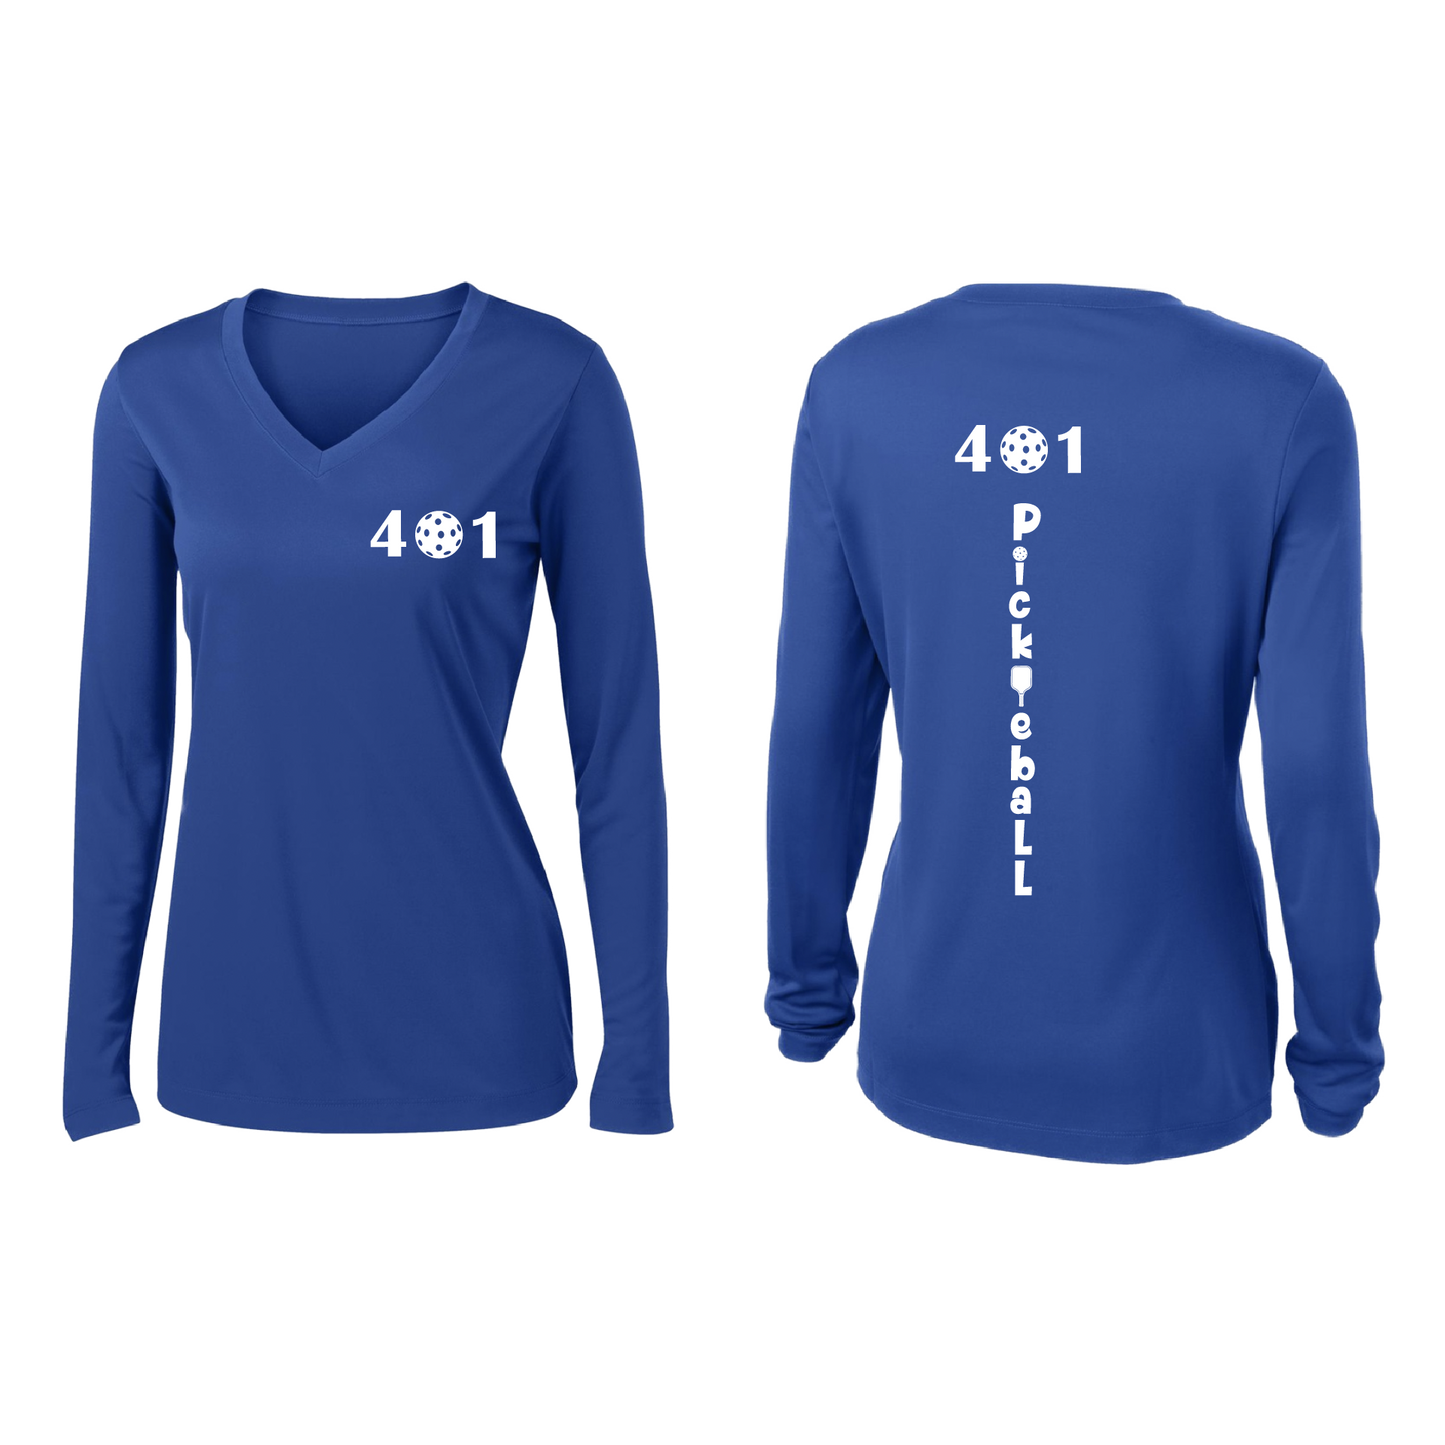 Design: 401 Pickleball  Women's Style: Long Sleeve V-Neck  Turn up the volume in this Women's shirt with its perfect mix of softness and attitude. Material is ultra-comfortable with moisture wicking properties and tri-blend softness. PosiCharge technology locks in color. Highly breathable